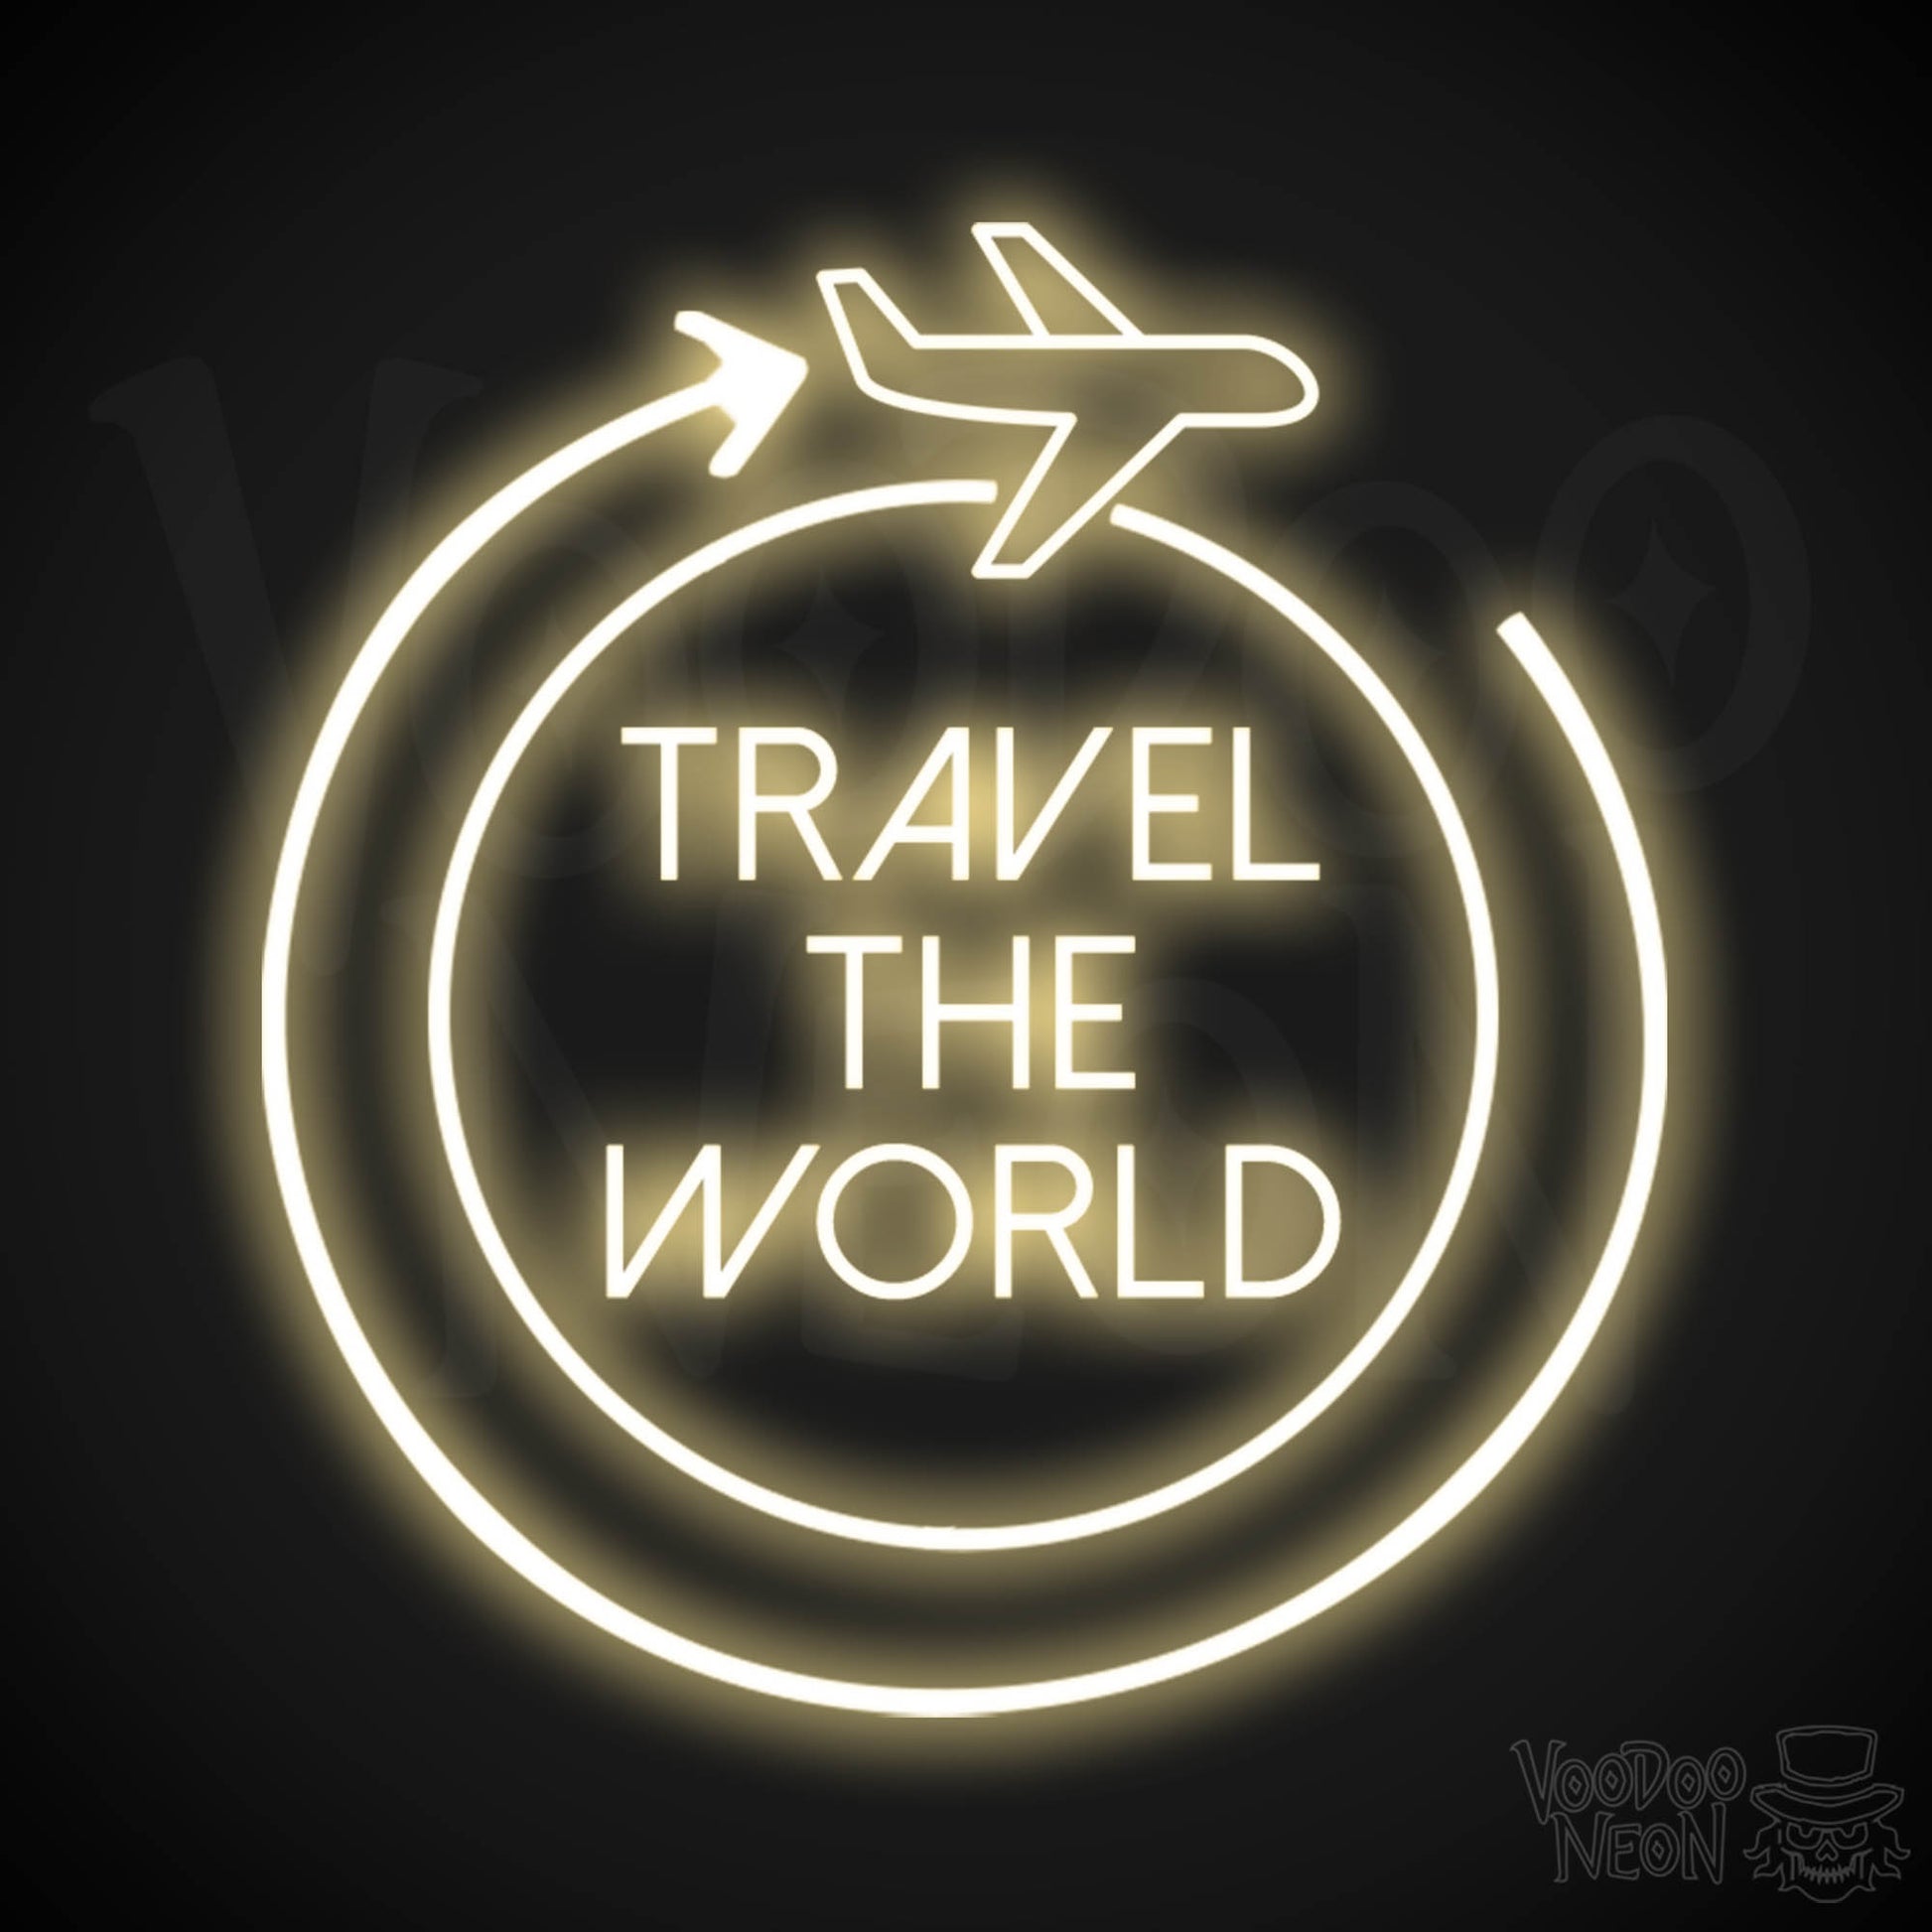 Let's Travel The World Neon Sign - LED Neon Wall Art - Color Warm White